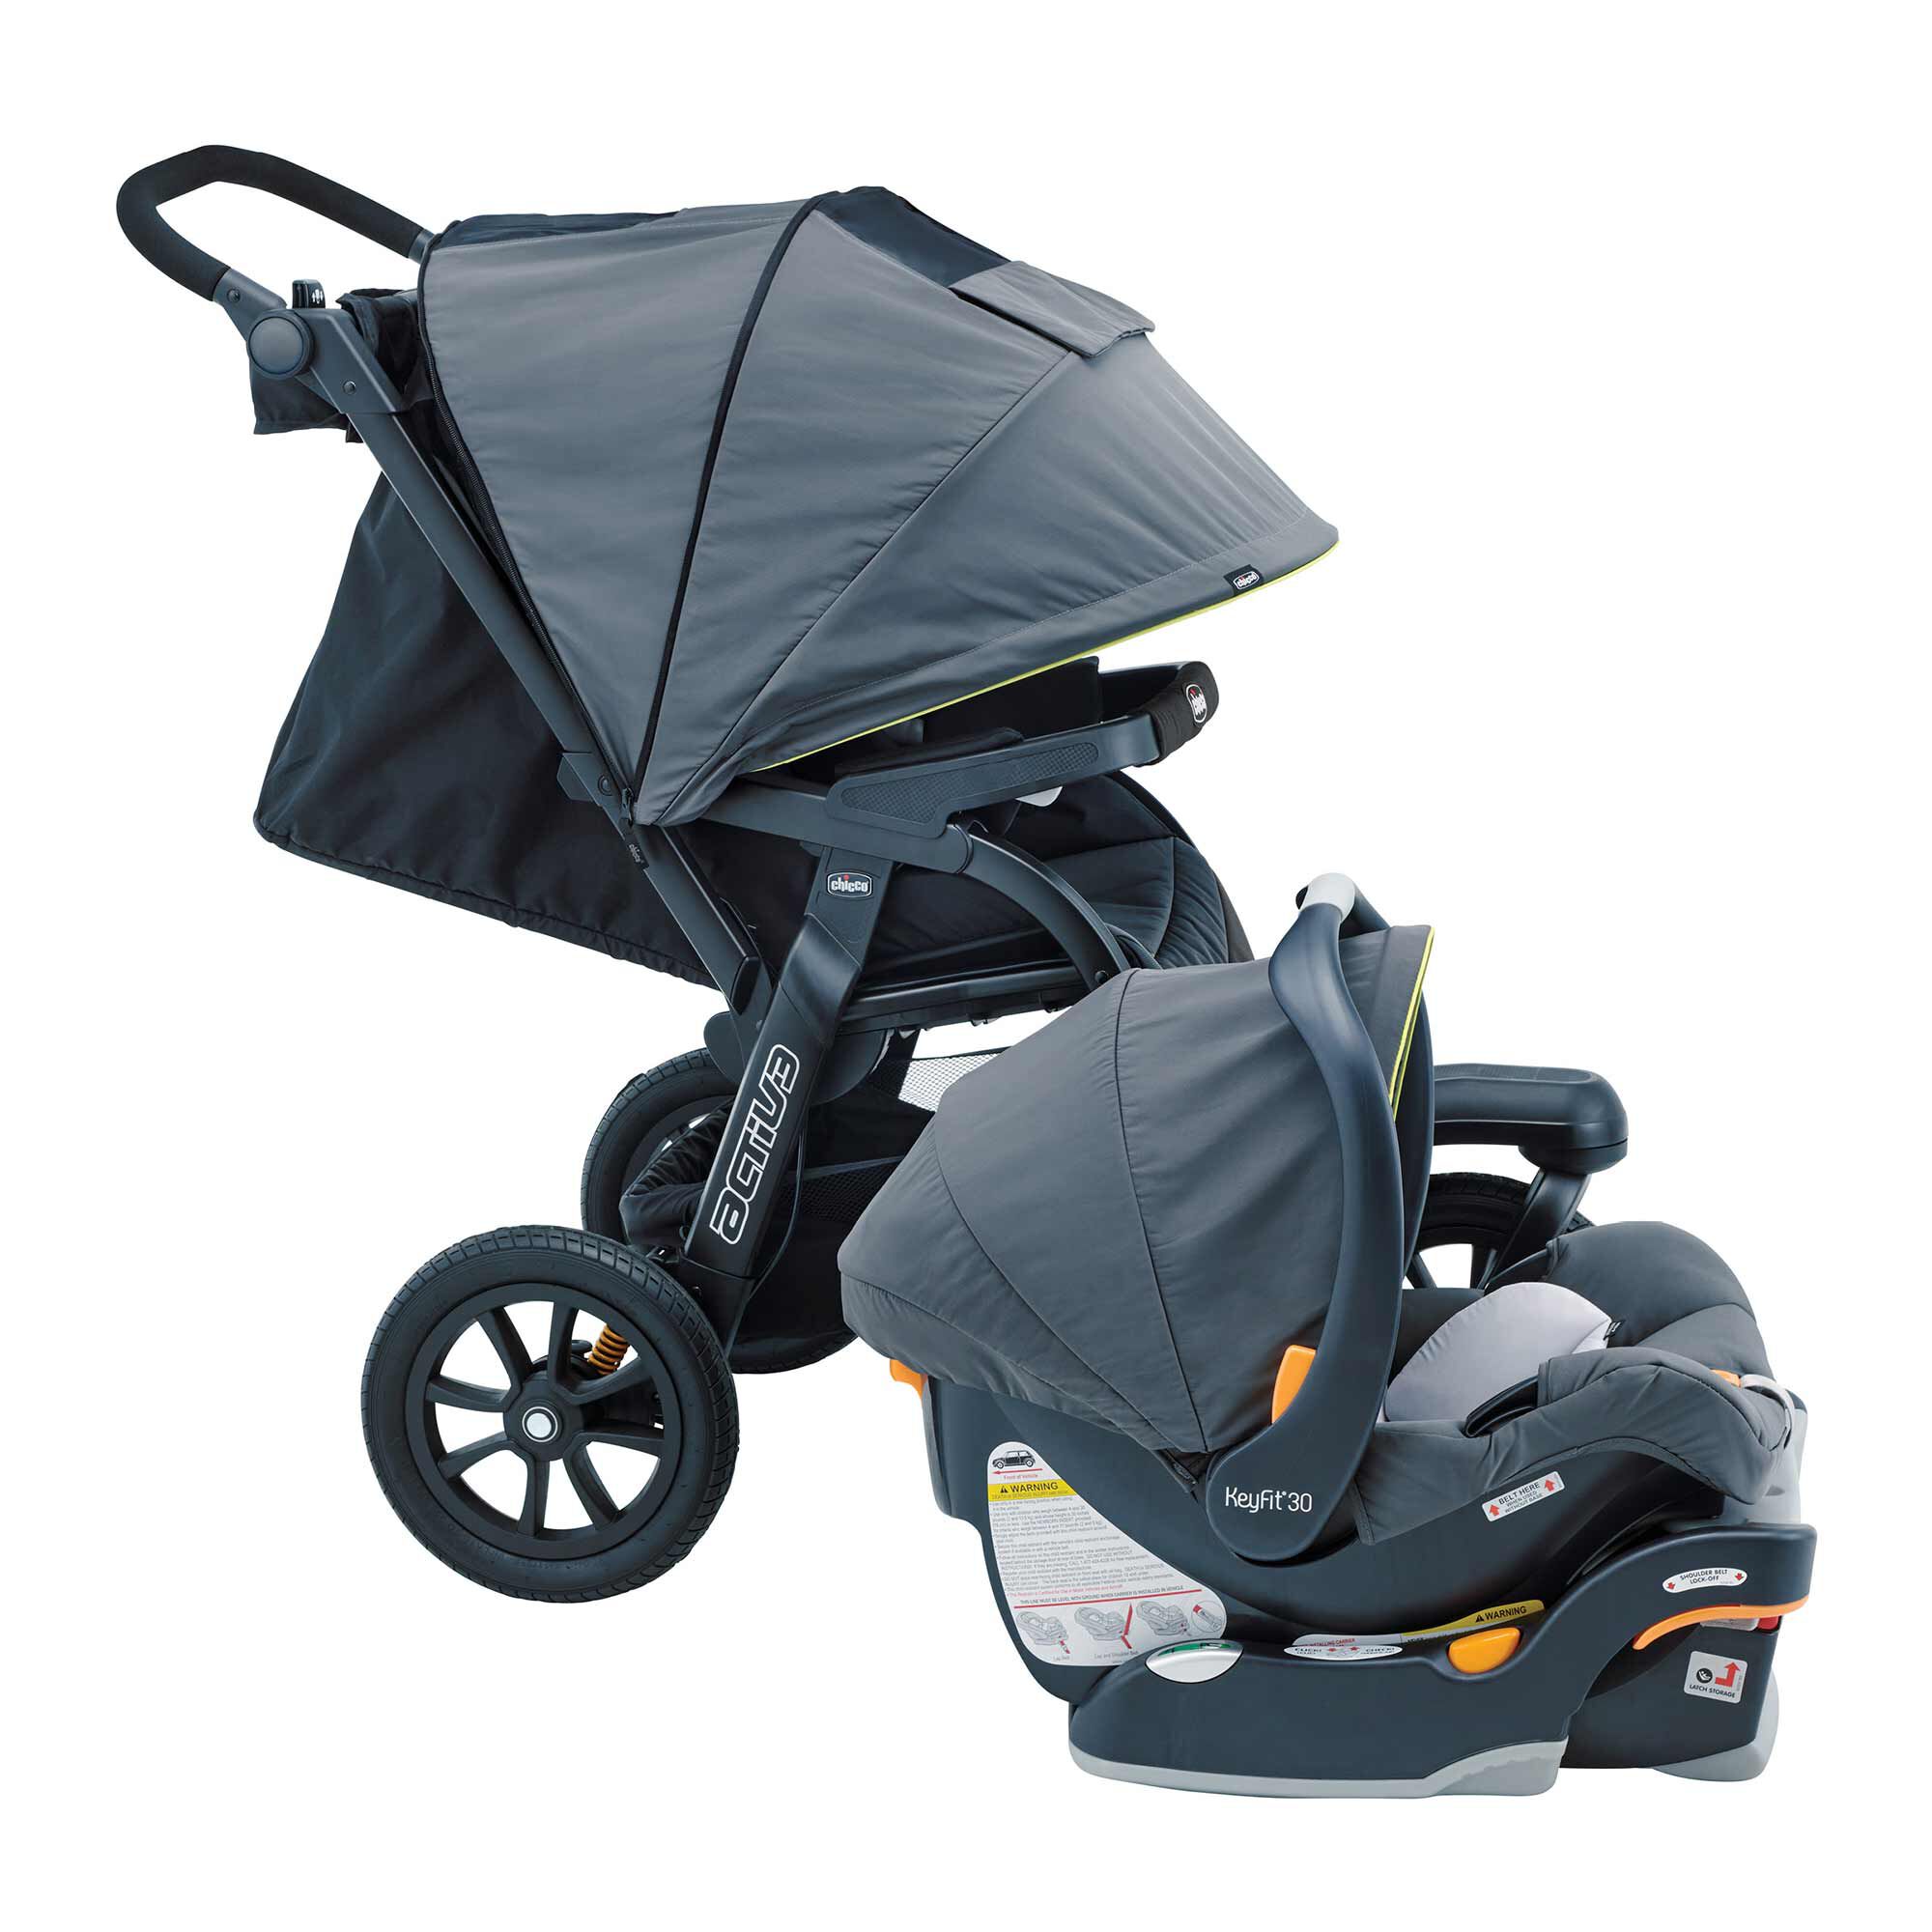 chicco activ3 travel system canada